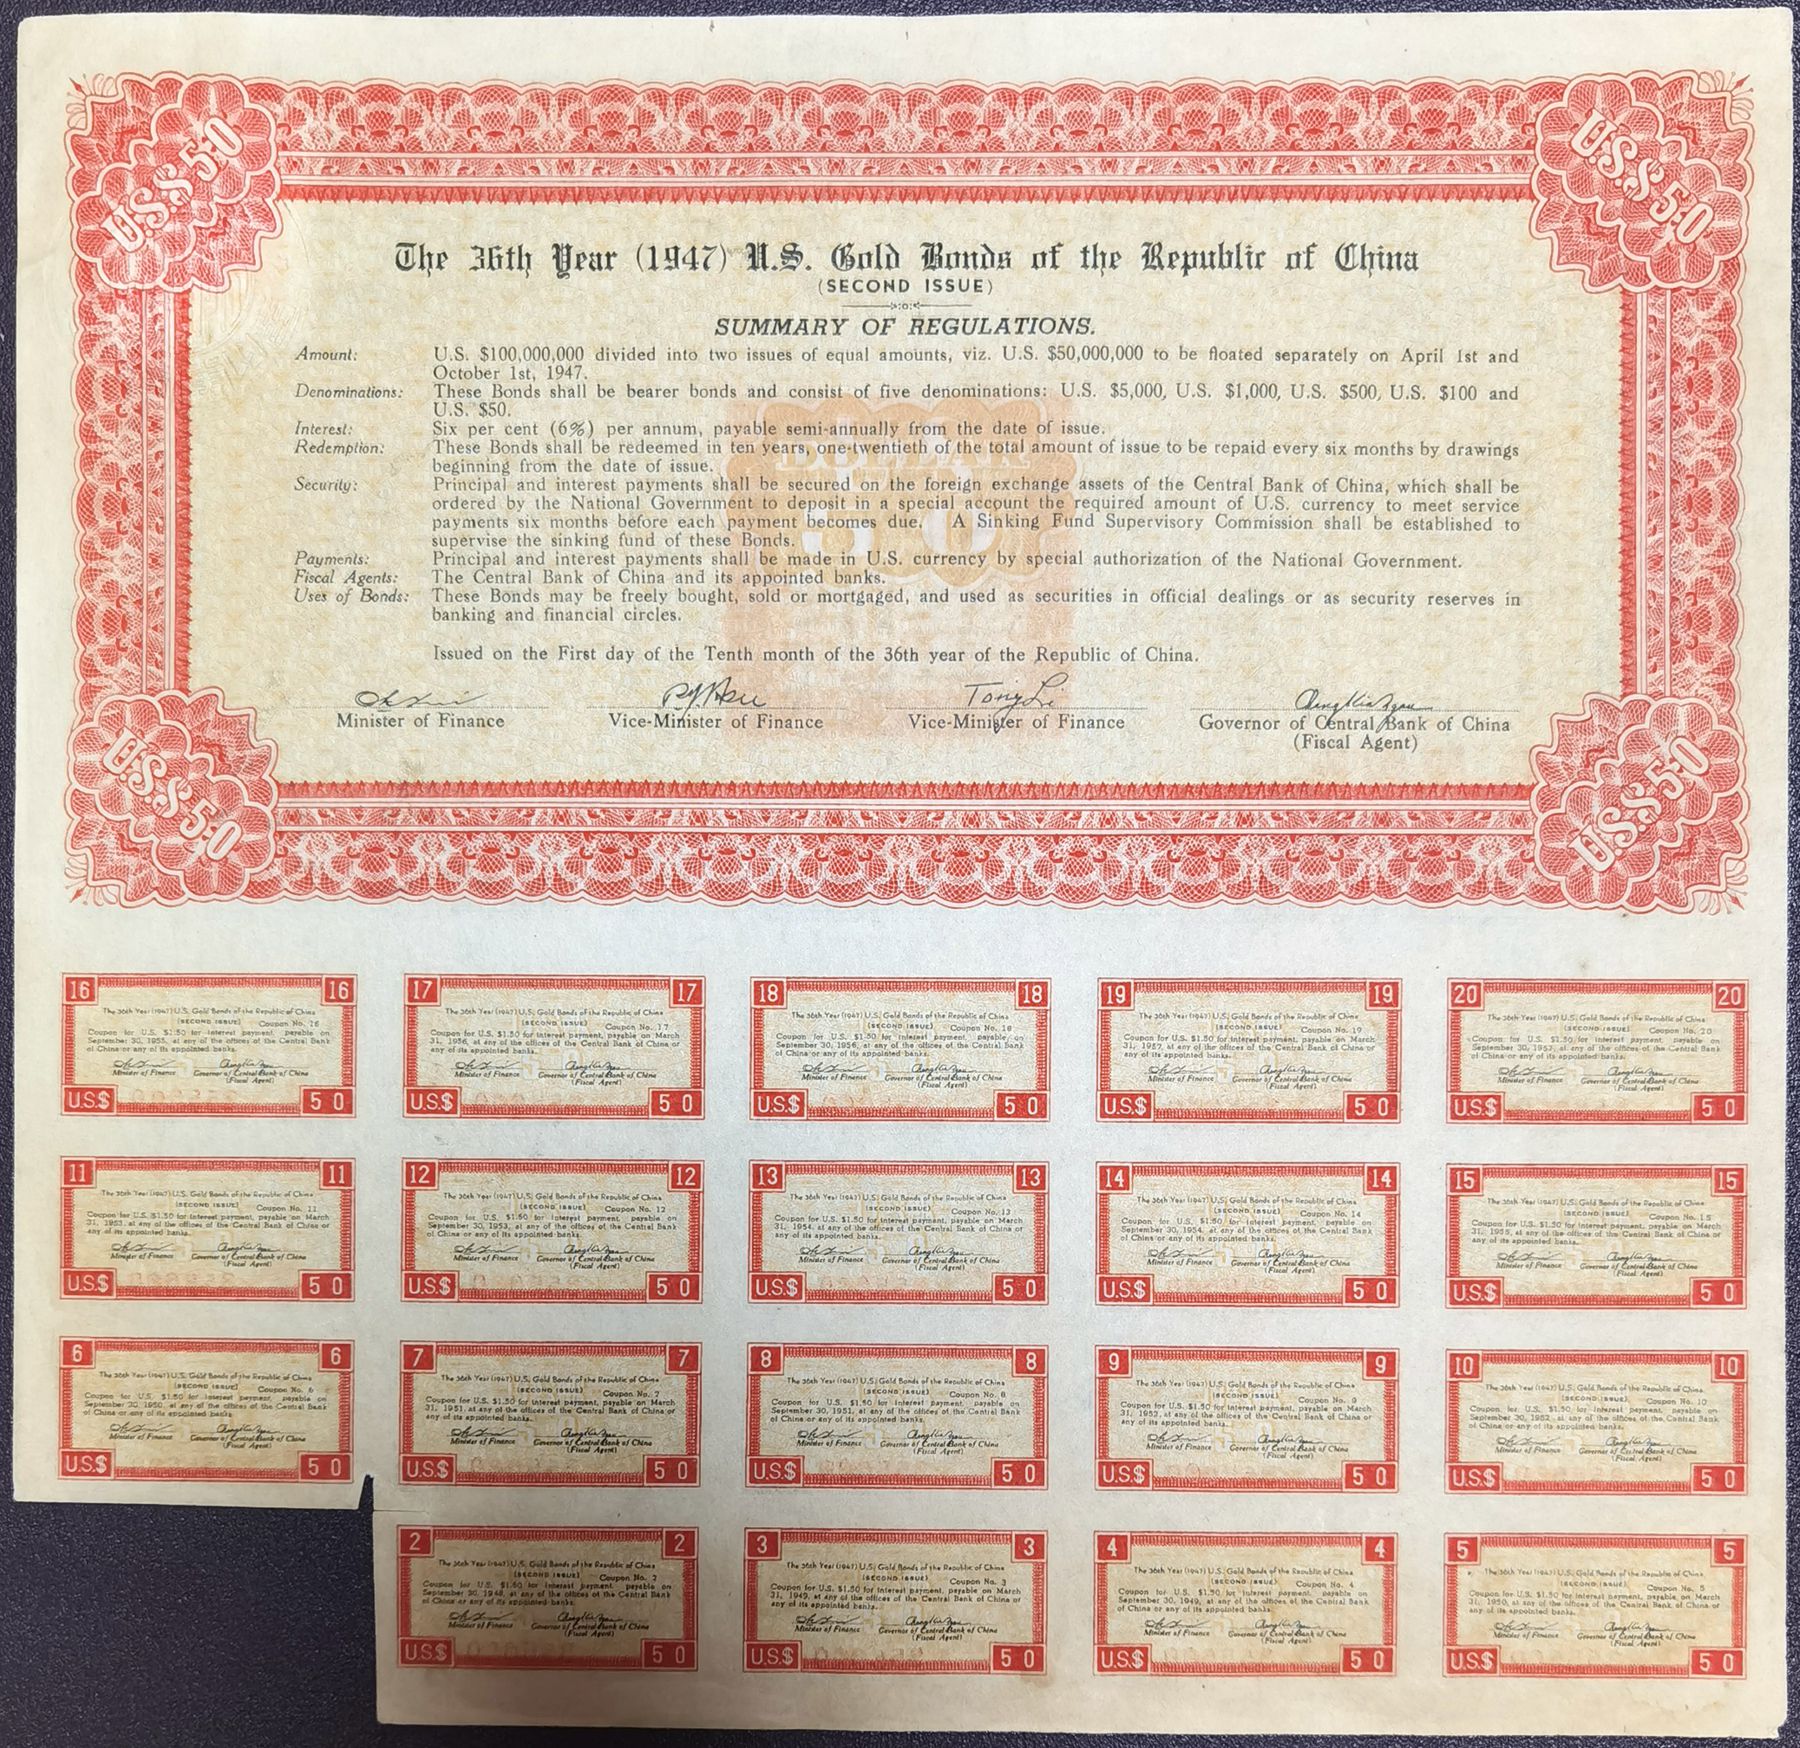 B2096, China 6% U.S.Gold Bond of 1947, USD 50 for Liberty (Second Issuing) - Click Image to Close